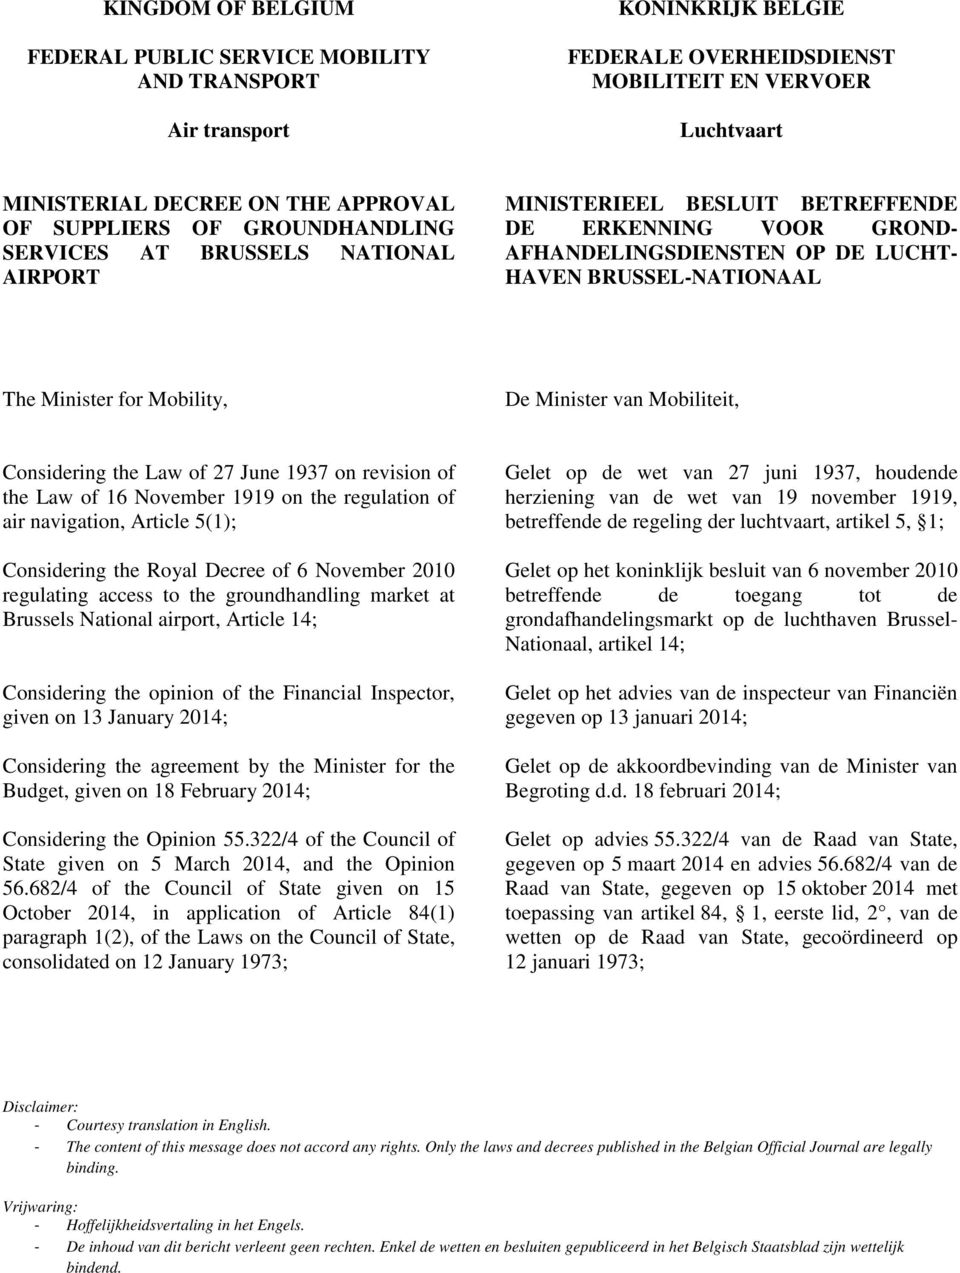 Mobility, De Minister van Mobiliteit, Considering the Law of 27 June 1937 on revision of the Law of 16 November 1919 on the regulation of air navigation, Article 5(1); Considering the Royal Decree of